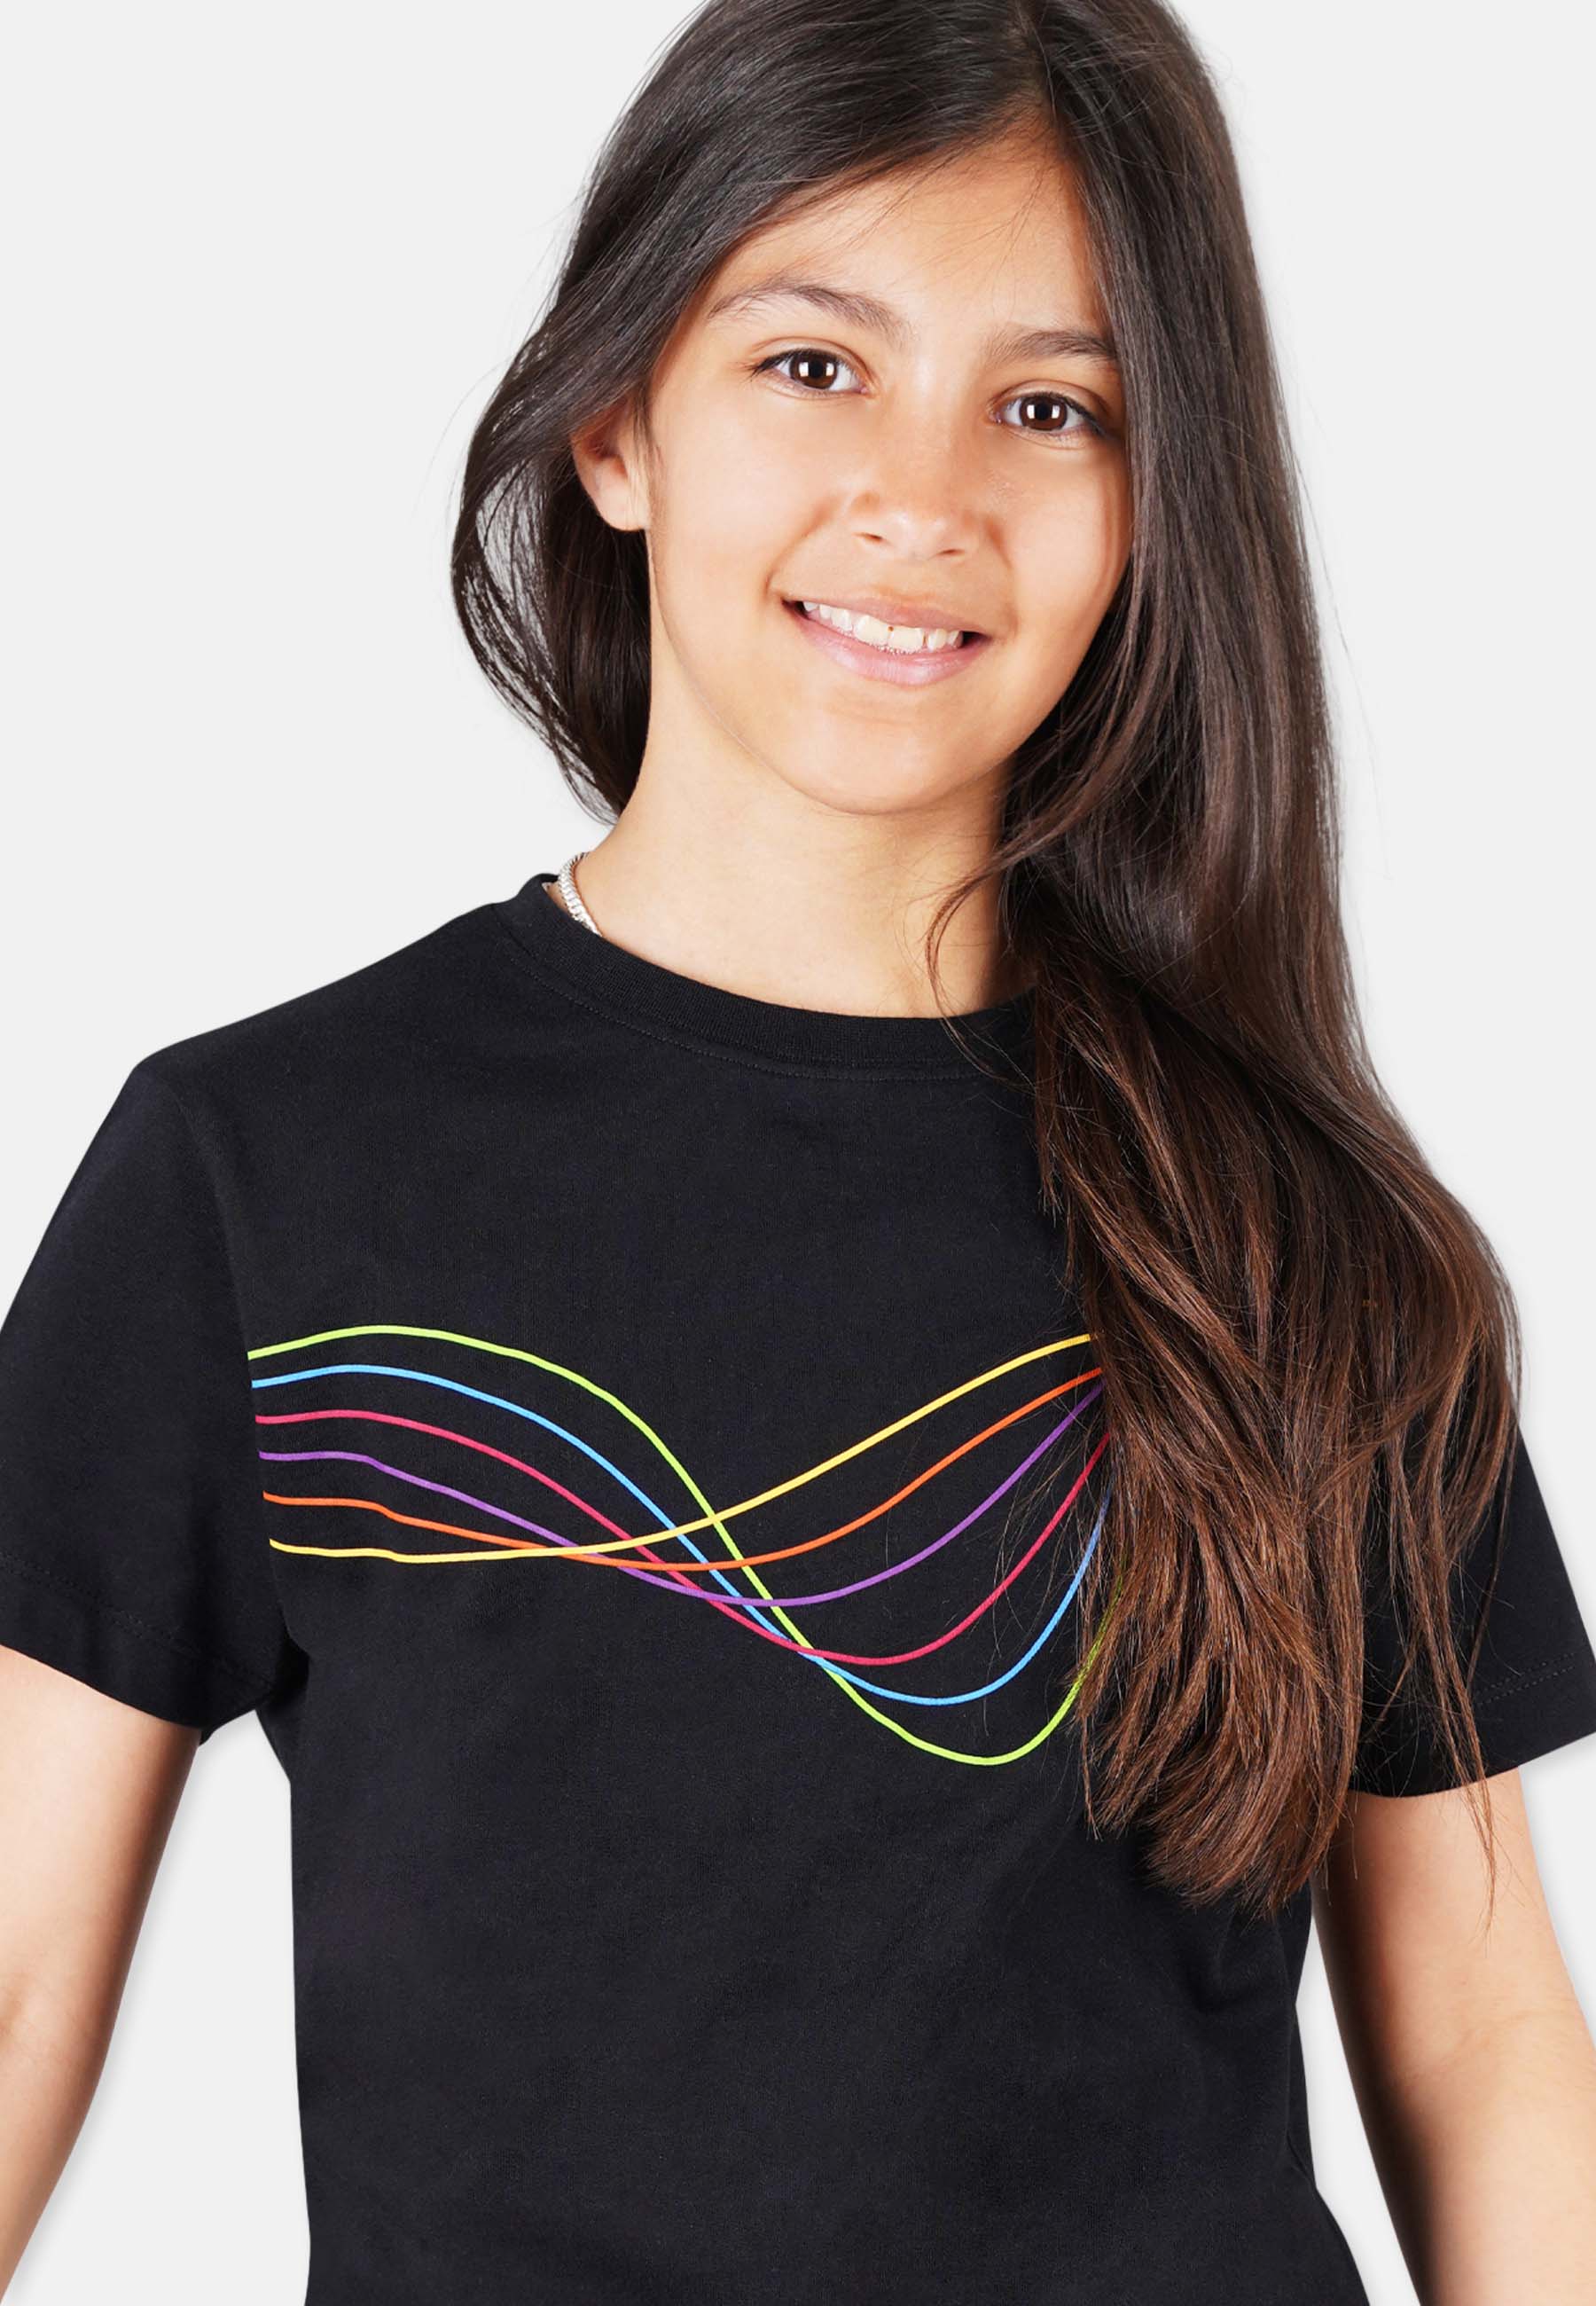 Frequency T-Shirt